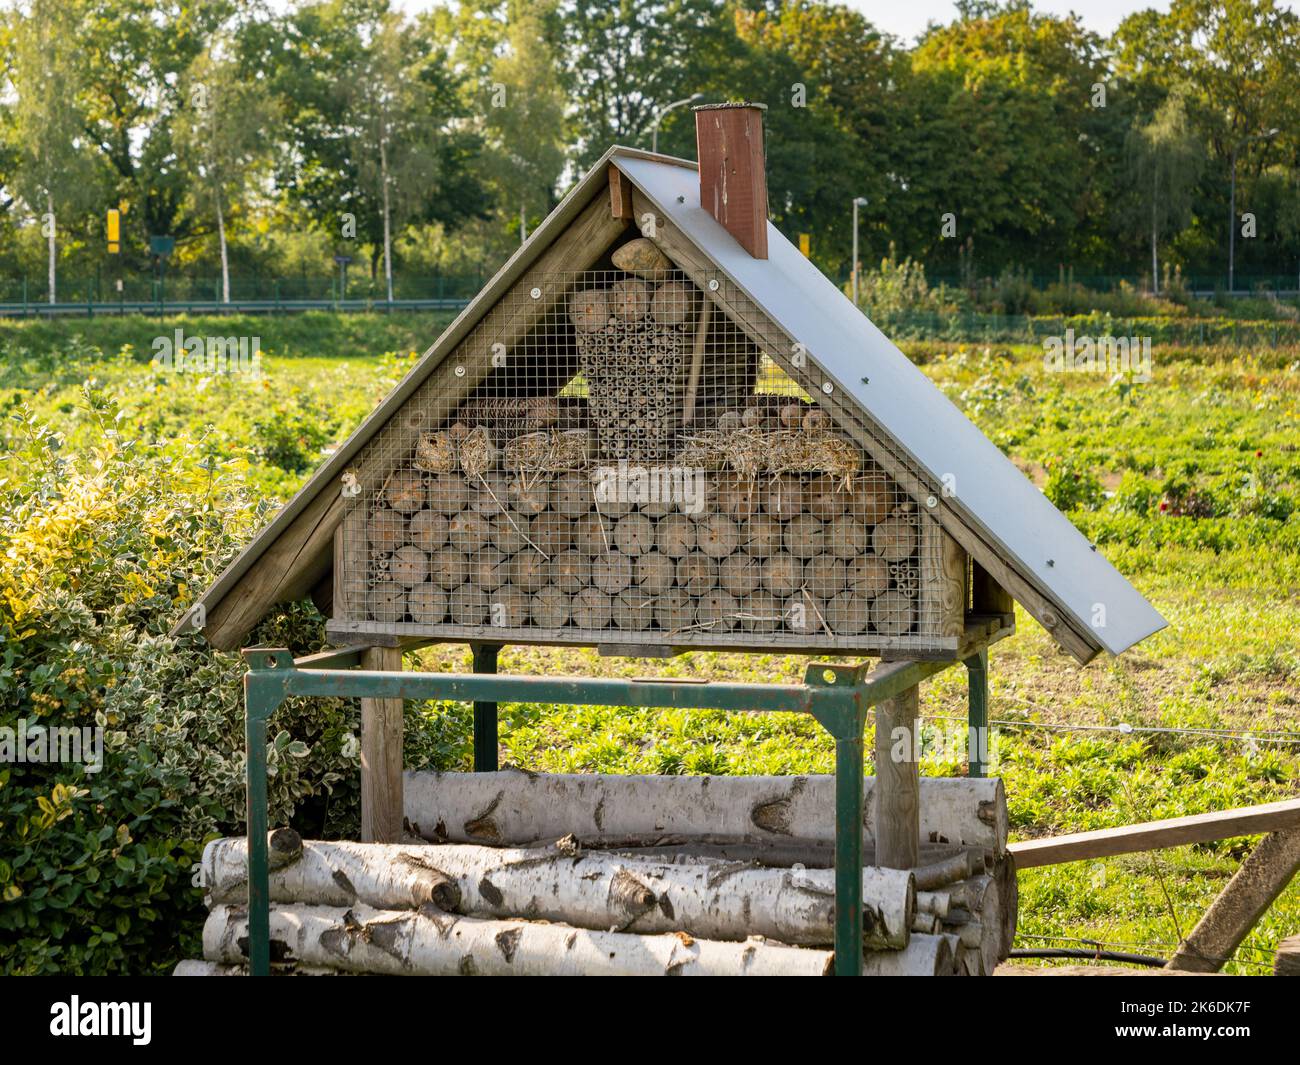 Insect hotel in a rural area. Bug house as a structure to provide shelter for small insects. Different shapes with a variety in size for bees and bugs Stock Photo